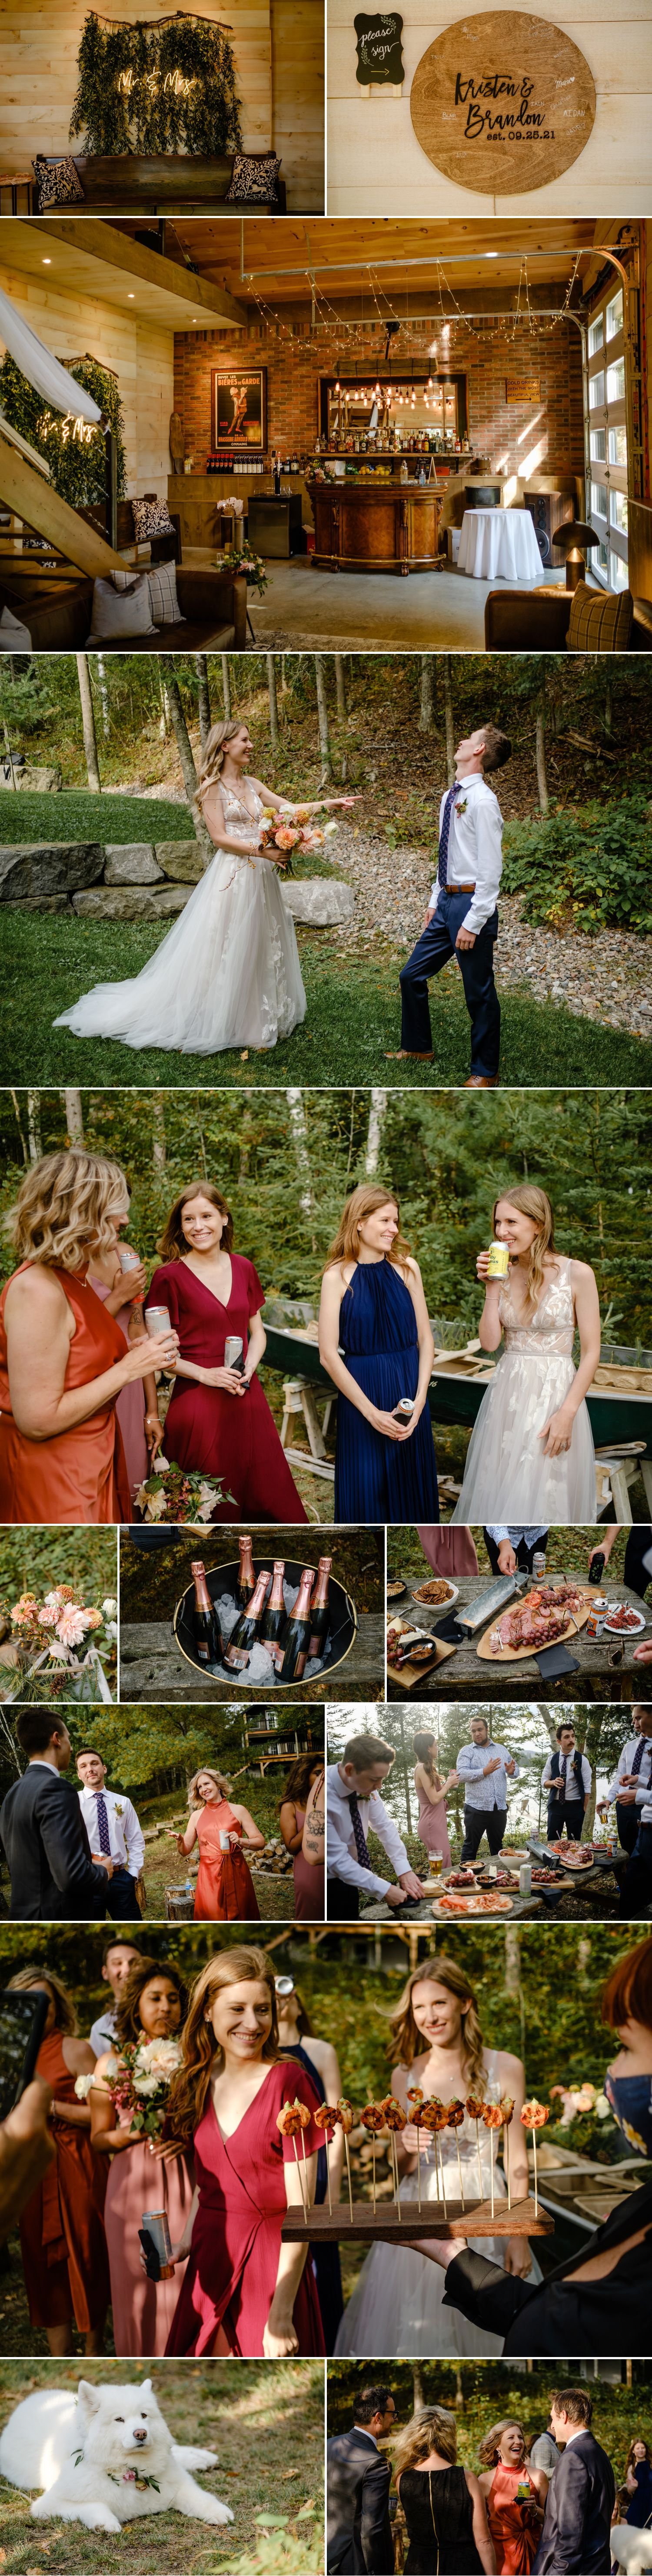 moments during an intimate cottage wedding cocktail reception in calabogie ontario